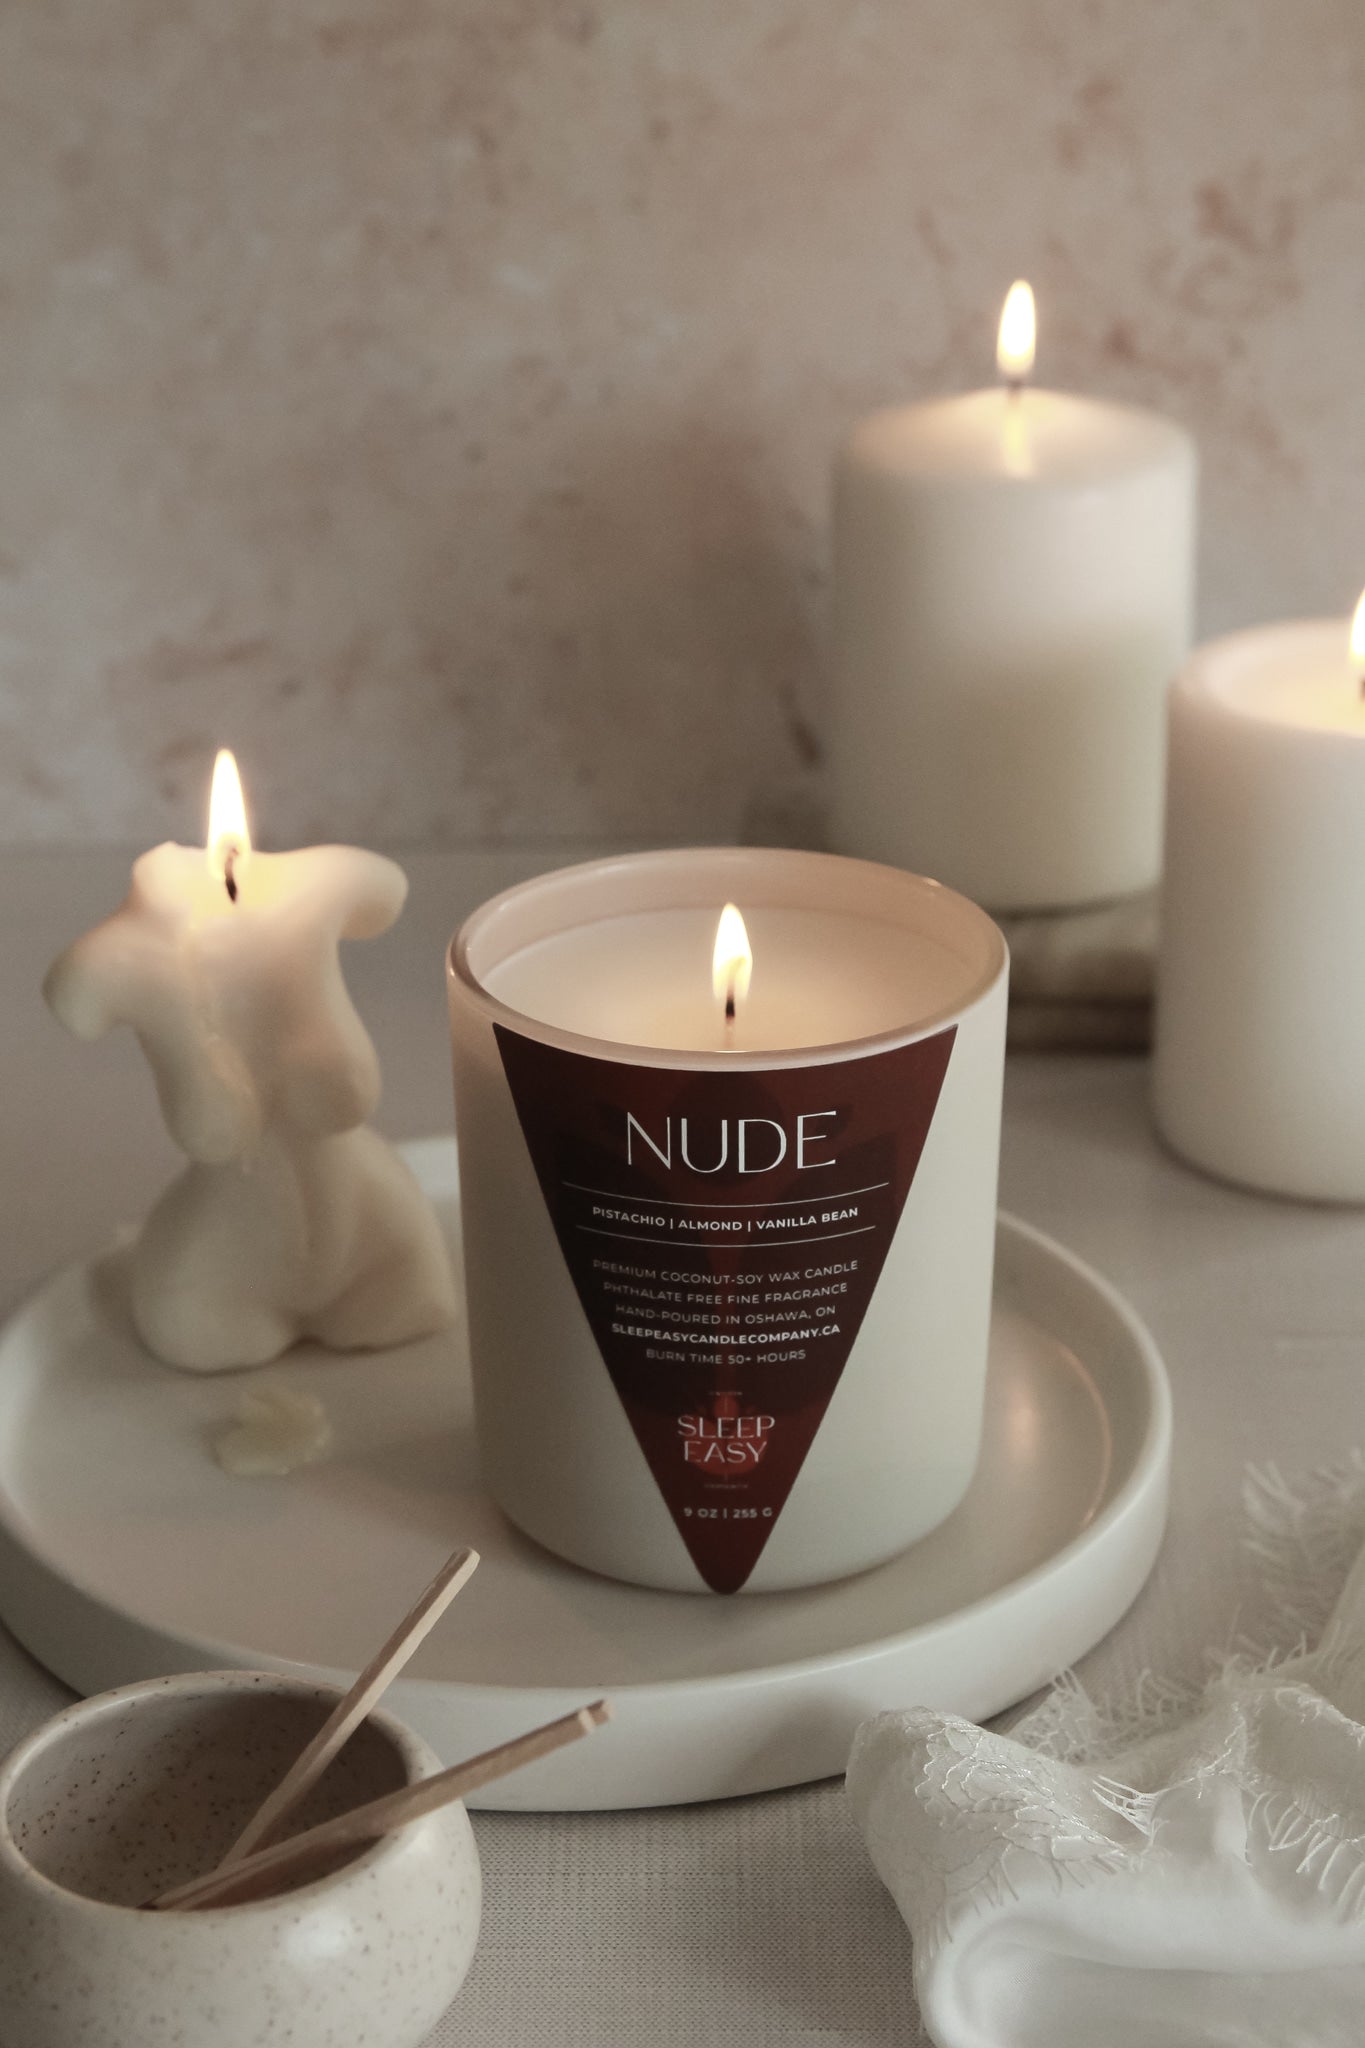 Nude - Coconut Soy Candle